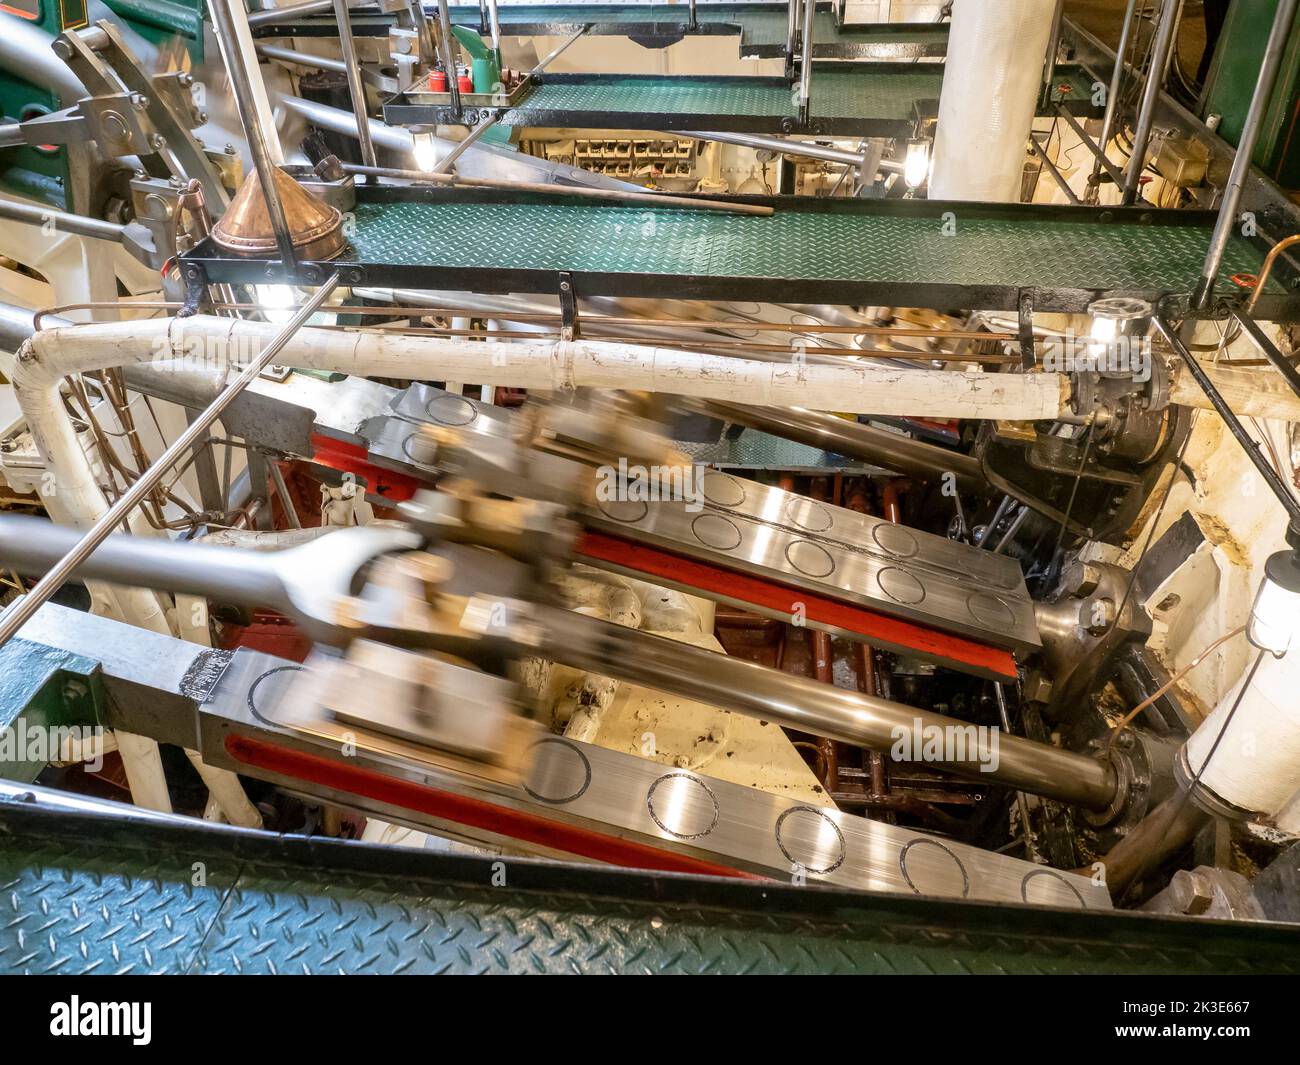 The engine roon of the Waverley, the UK's only seagoing paddle steamer, in Yarmouth, Isle of White, UK. Stock Photo